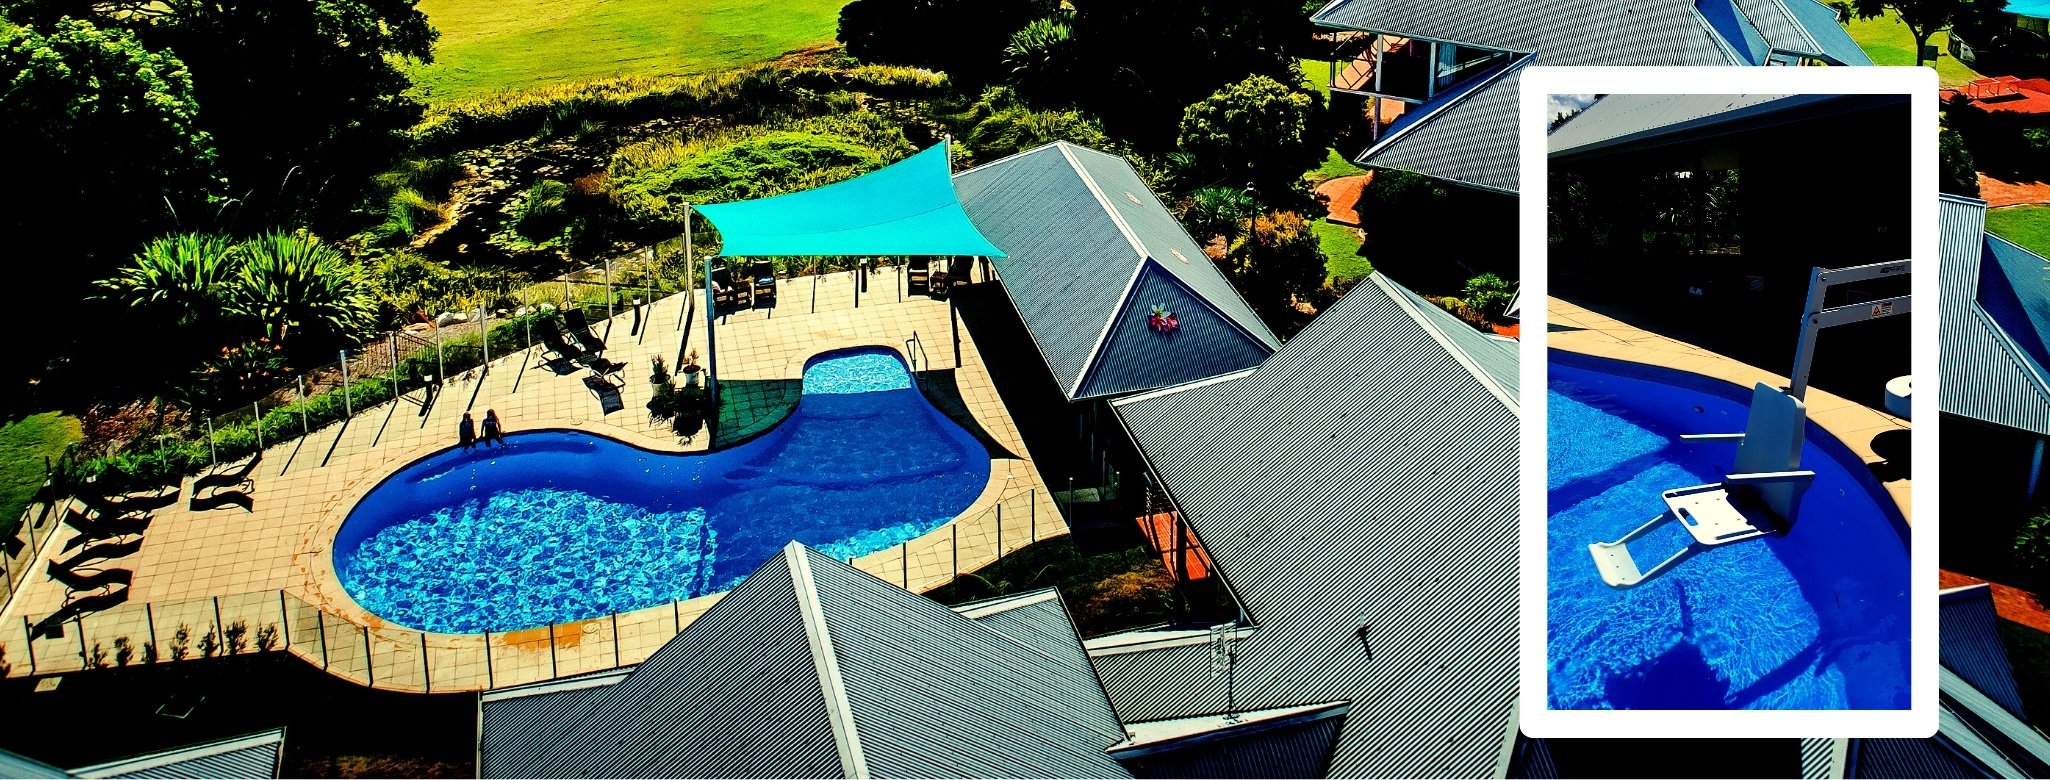 Riverside Holiday Resort Urunga NSW Pool with Dolphin Mobility Chair Lift 